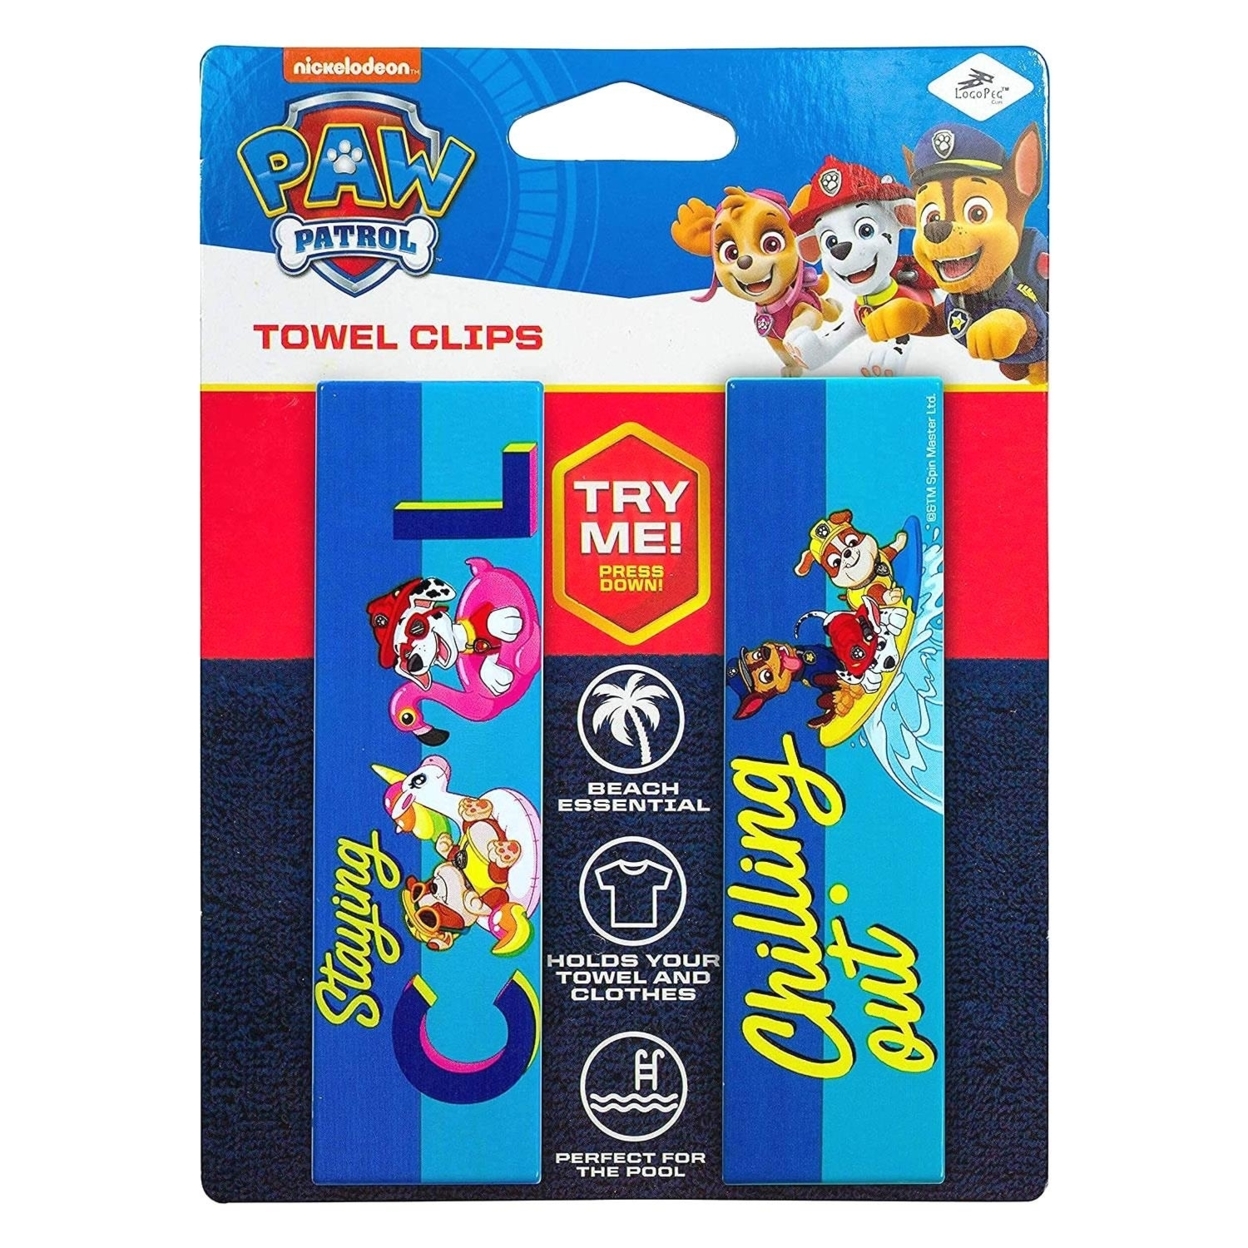 Paw Patrol Beach Towel Clips Chilling Out Cool Nickelodeon Pool Secure Bag Chair LogoPeg